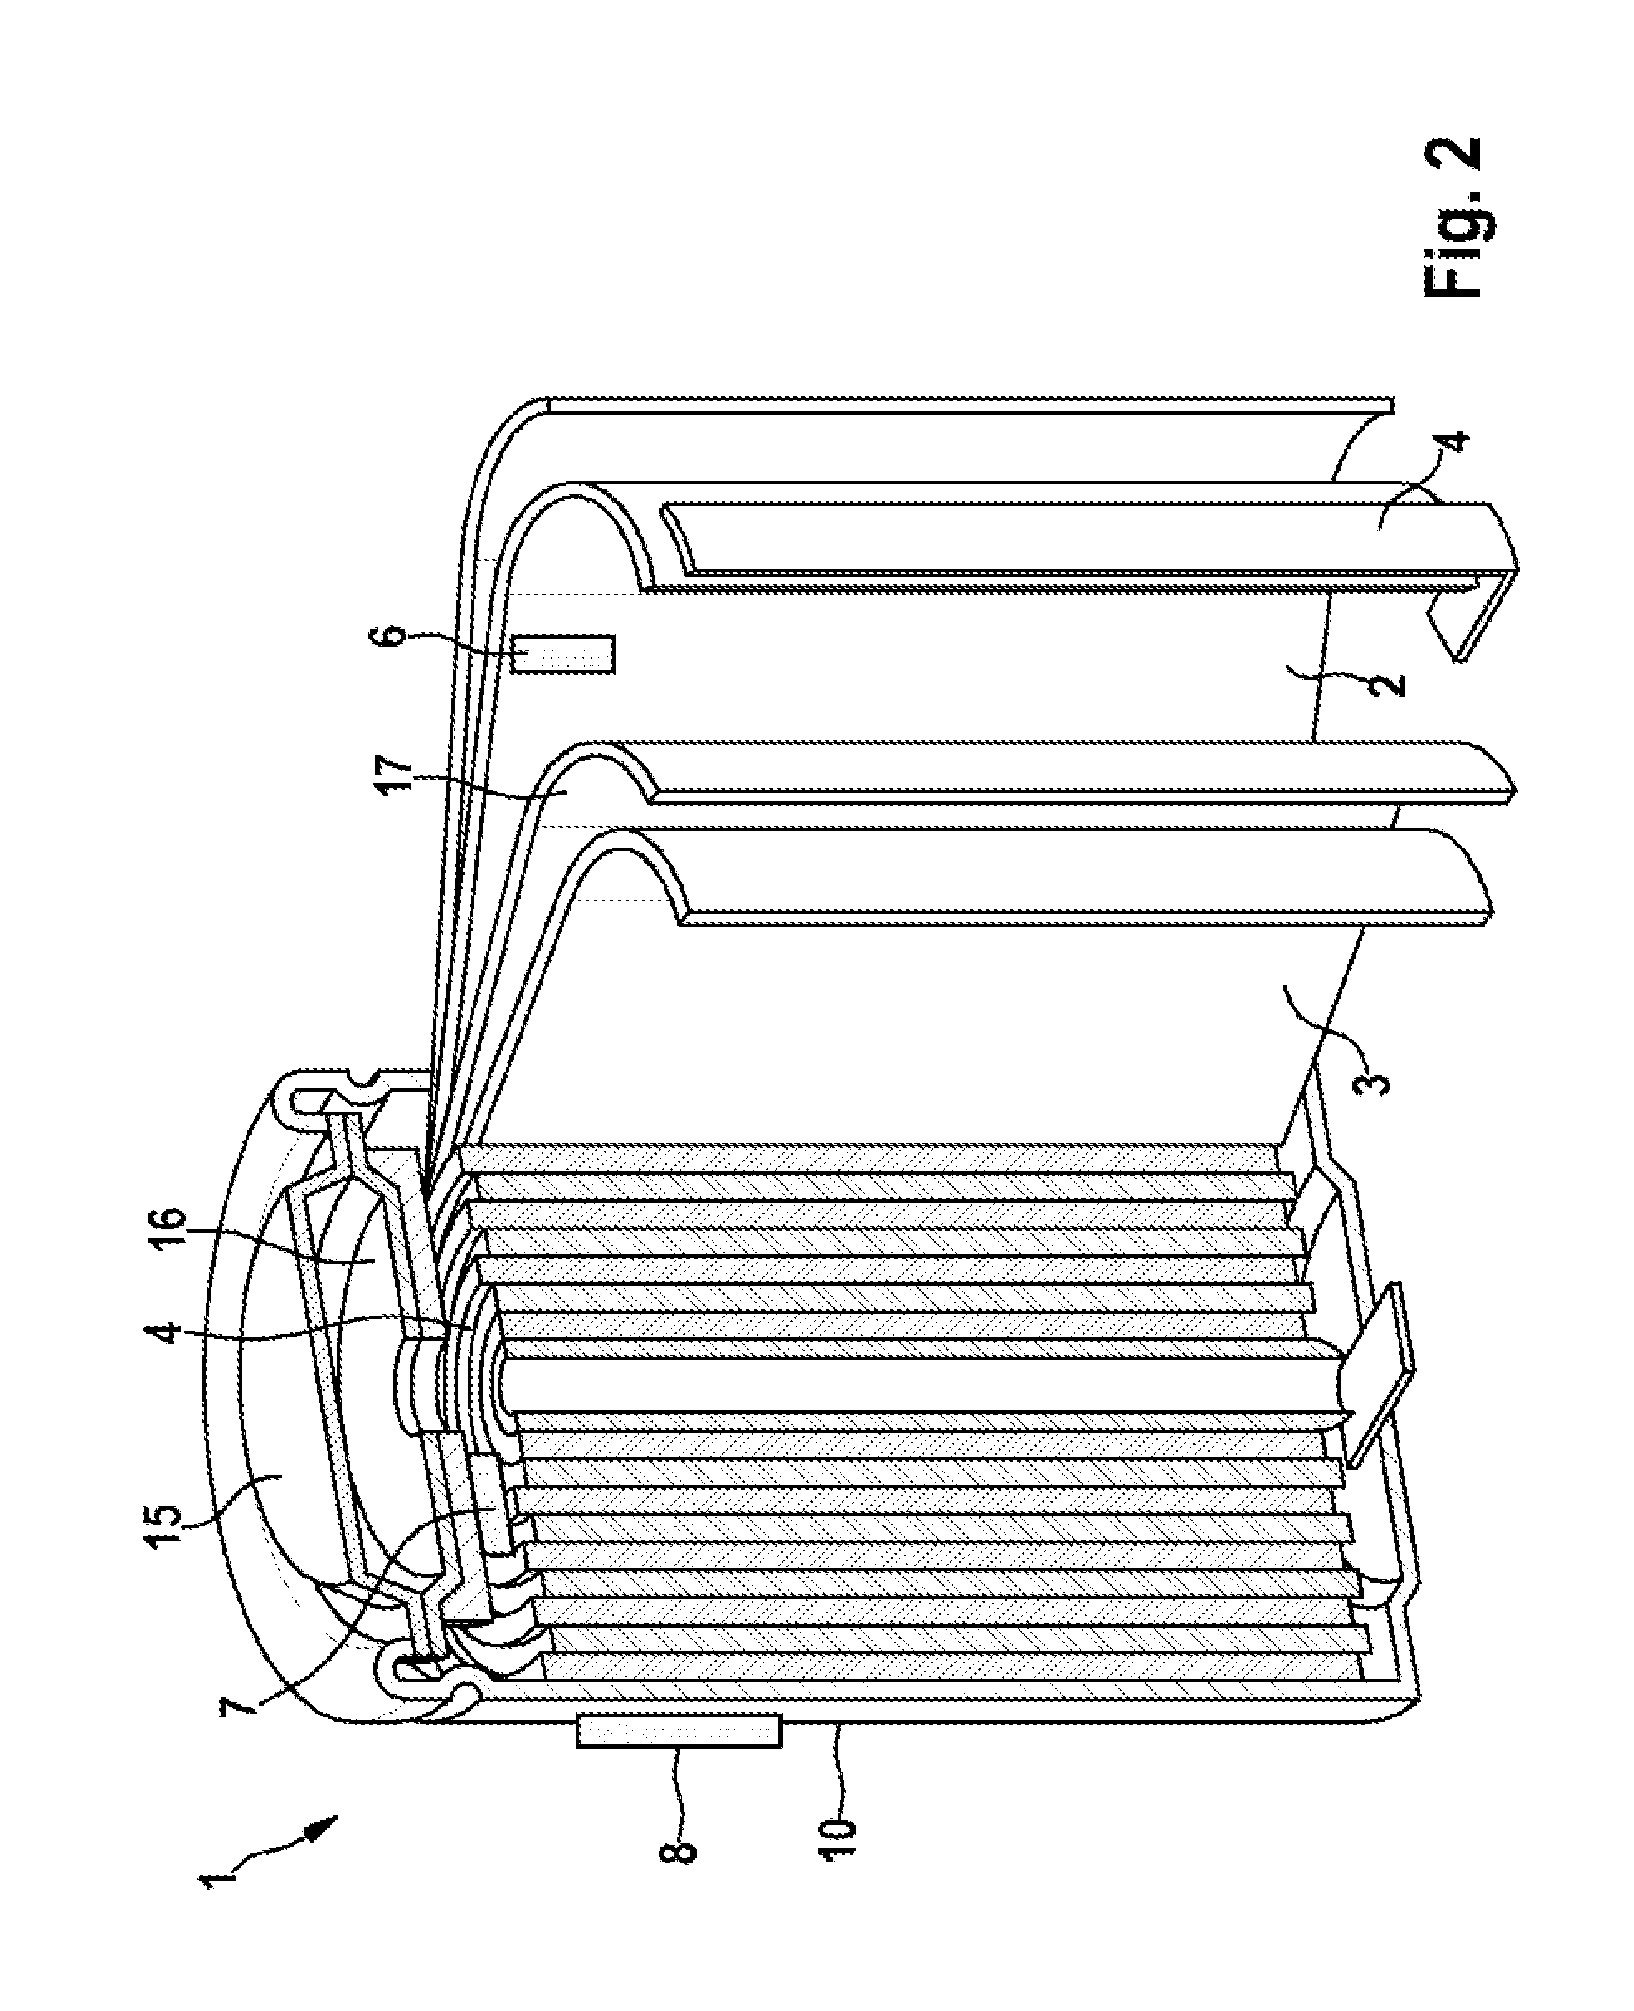 Battery cell comprising a device for monitoring at least one parameter of the battery cell